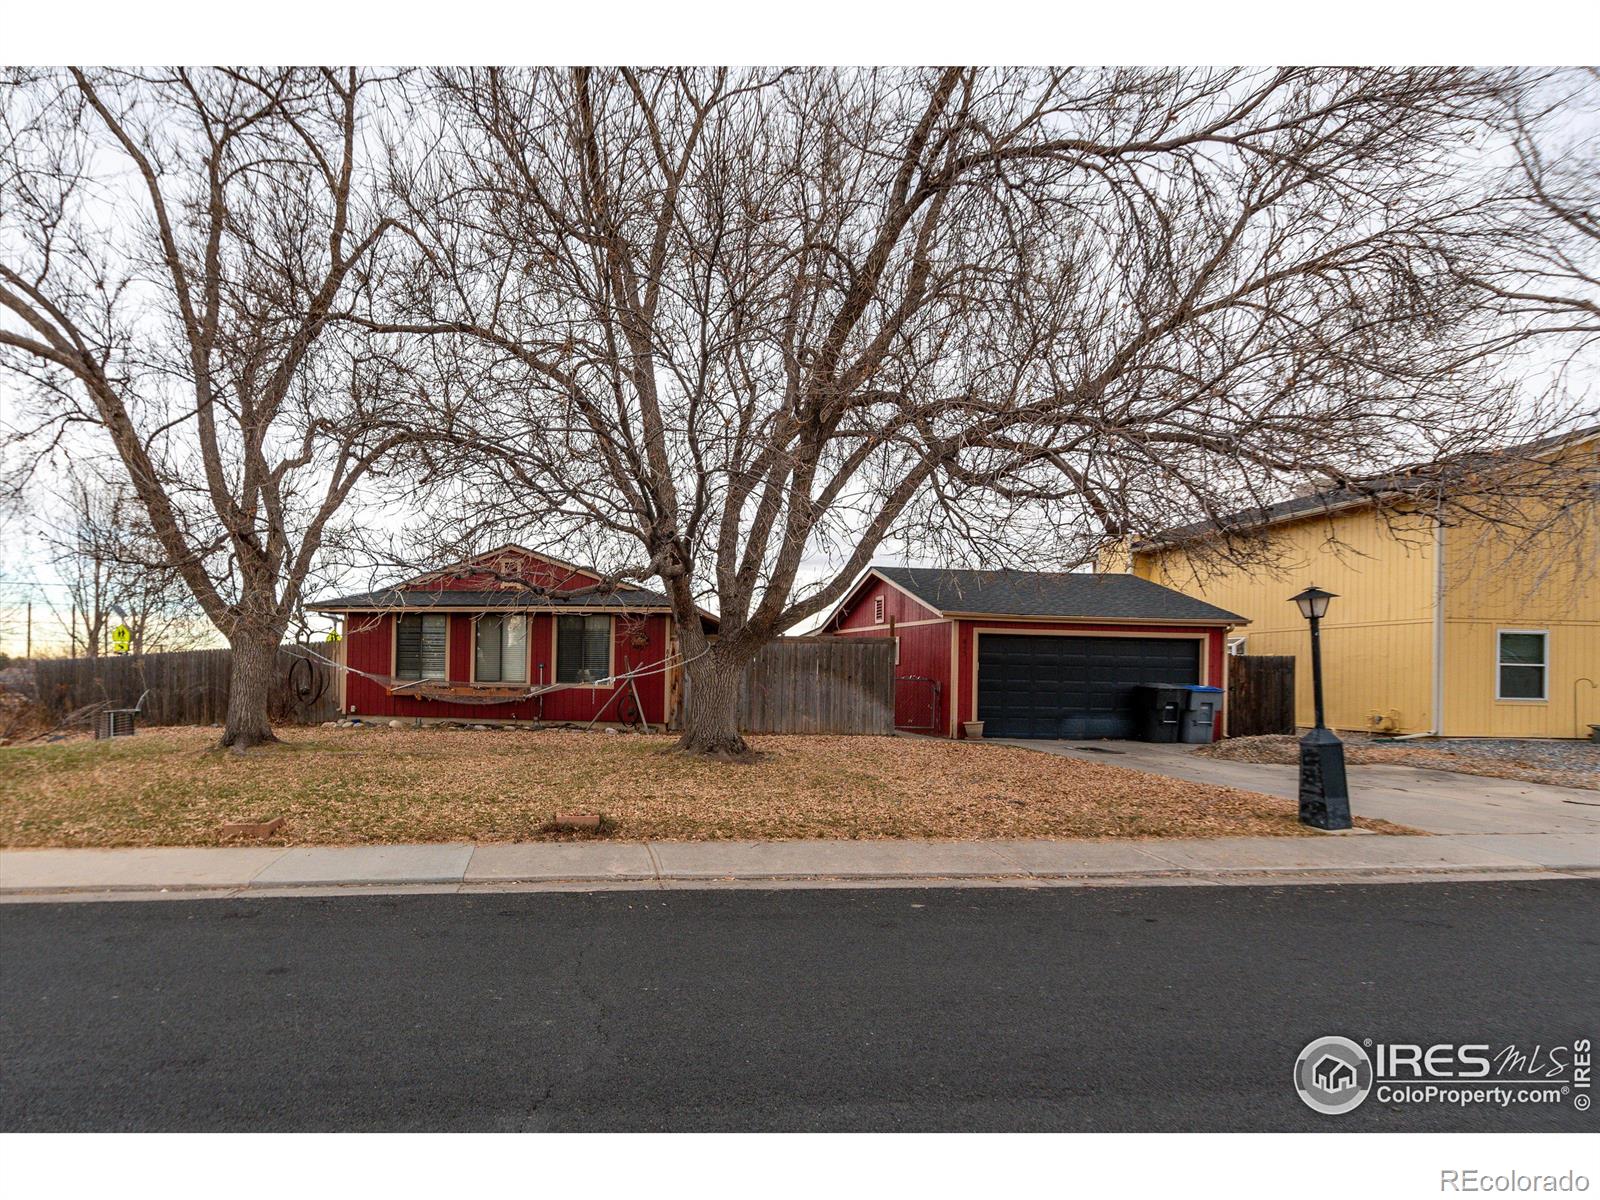 845  independence drive, longmont sold home. Closed on 2024-02-23 for $400,000.